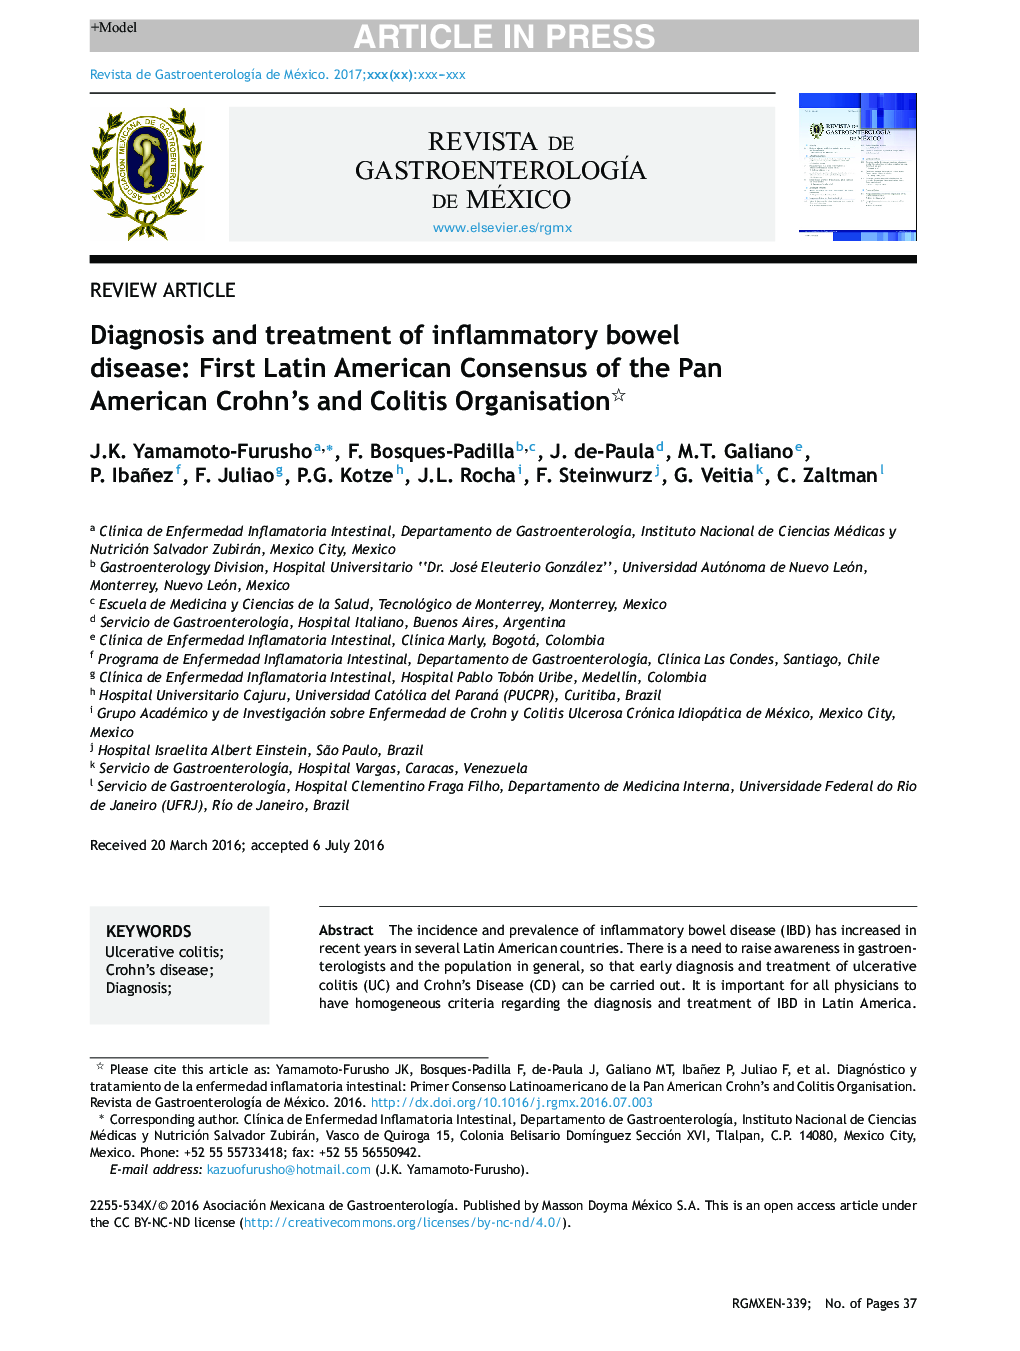 Diagnosis and treatment of inflammatory bowel disease: First Latin American Consensus of the Pan American Crohn's and Colitis Organisation